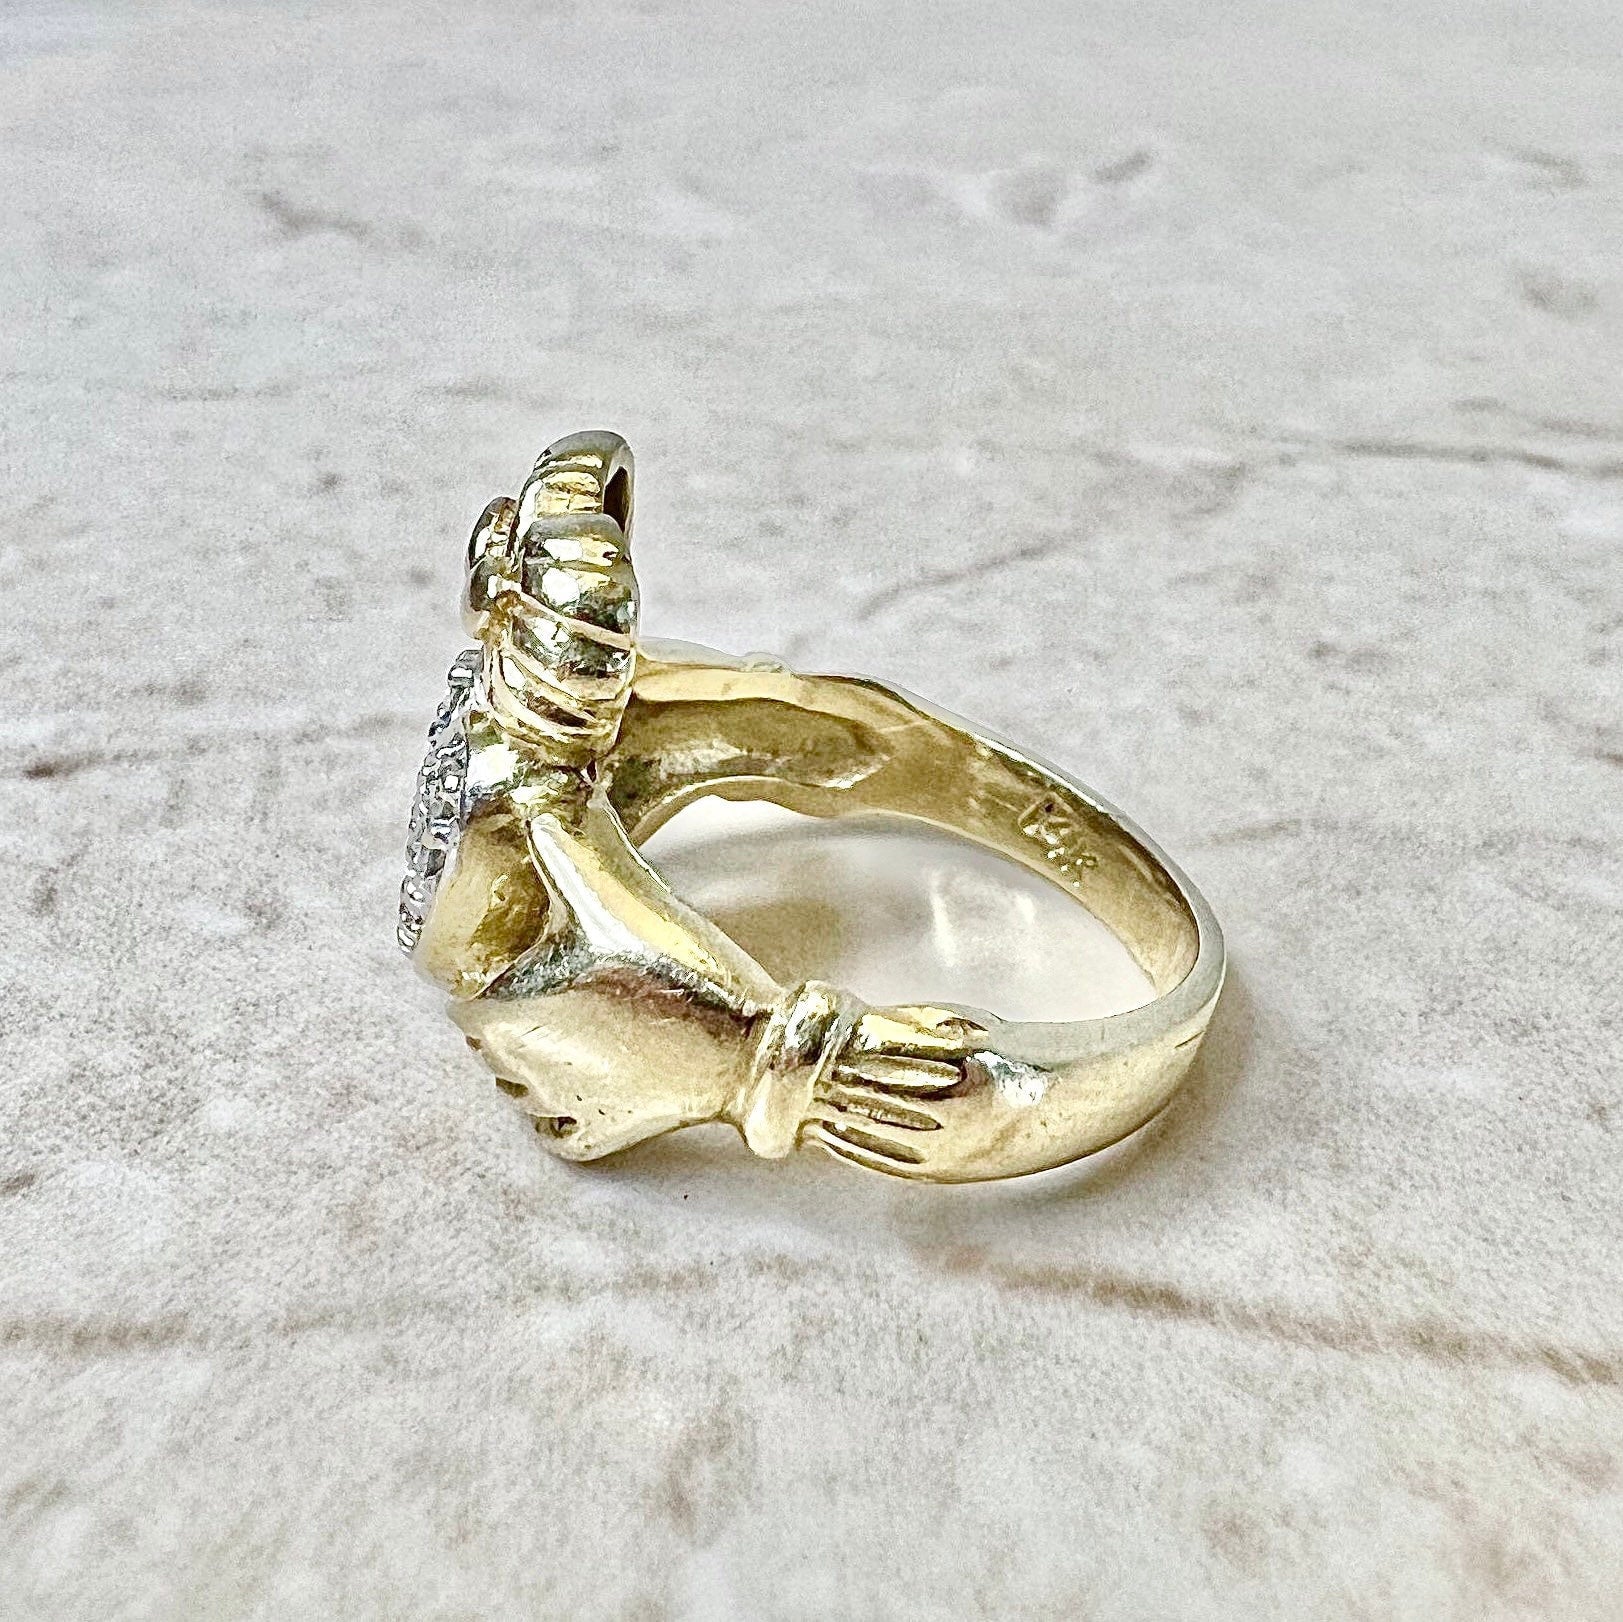 Vintage 14K Gold Diamond Claddagh Ring - Promise Ring - Friendship Ring - Gold Engagement ring - Best Gifts For Her - Valentine’s Day Gifts